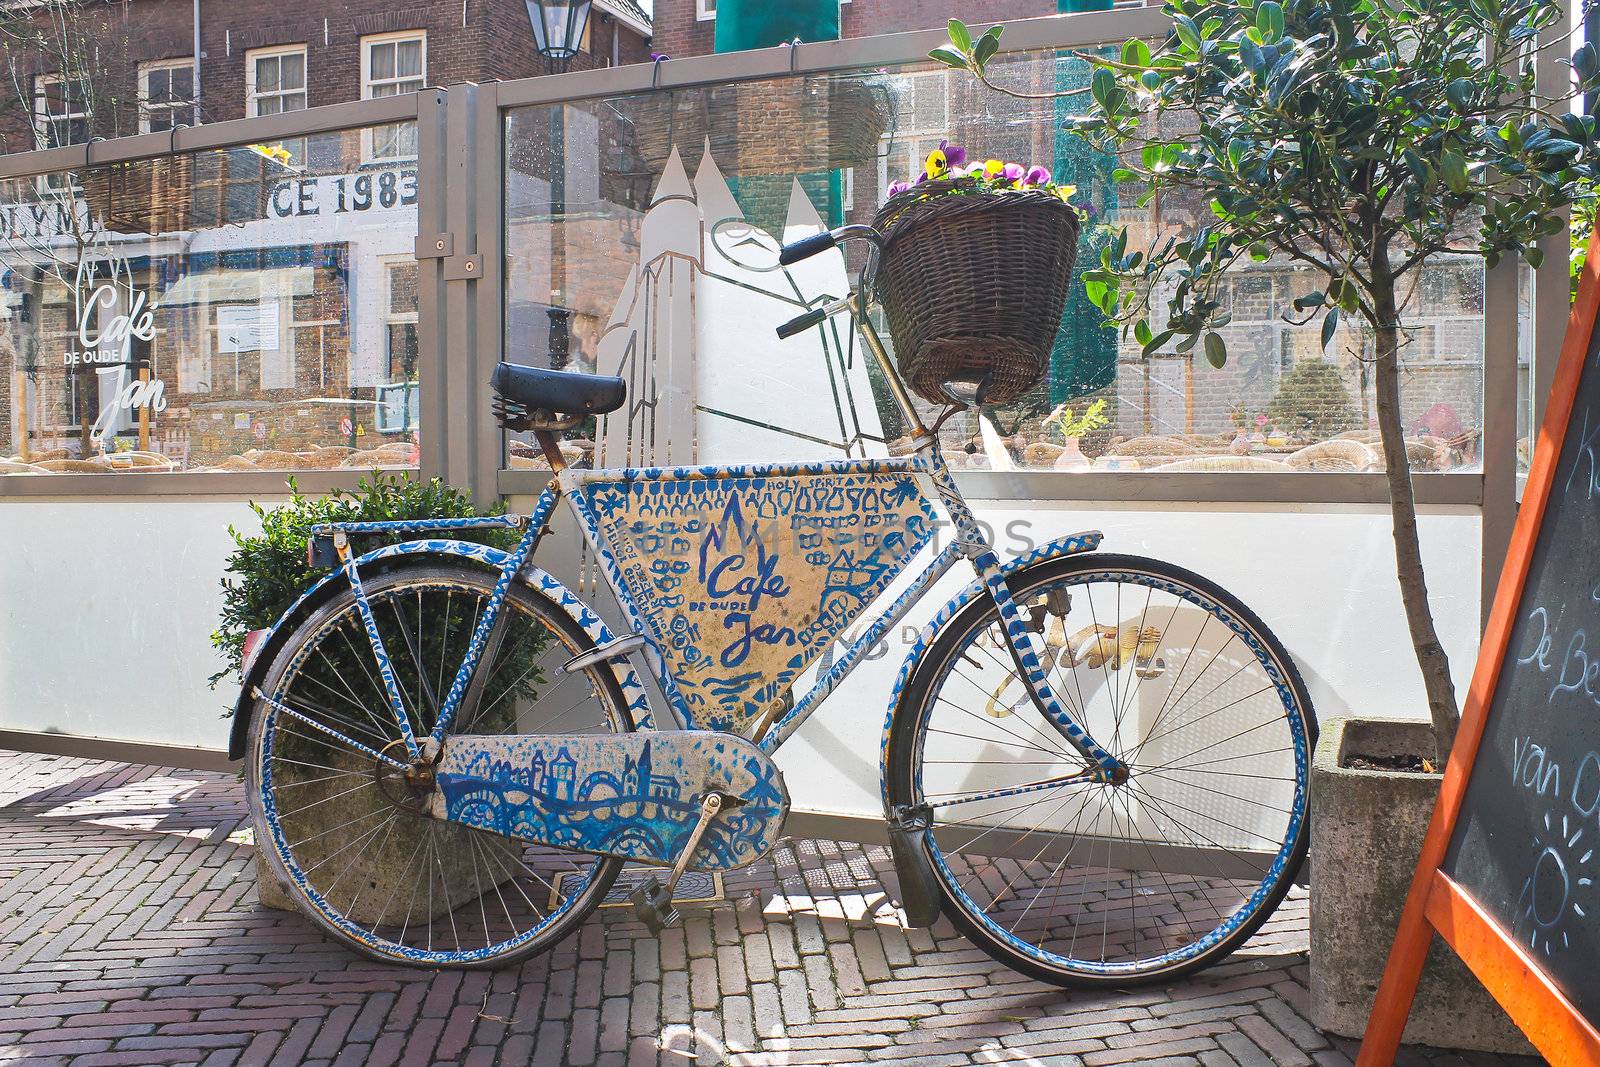 Bicycle advertising café in Delft,  Netherlands